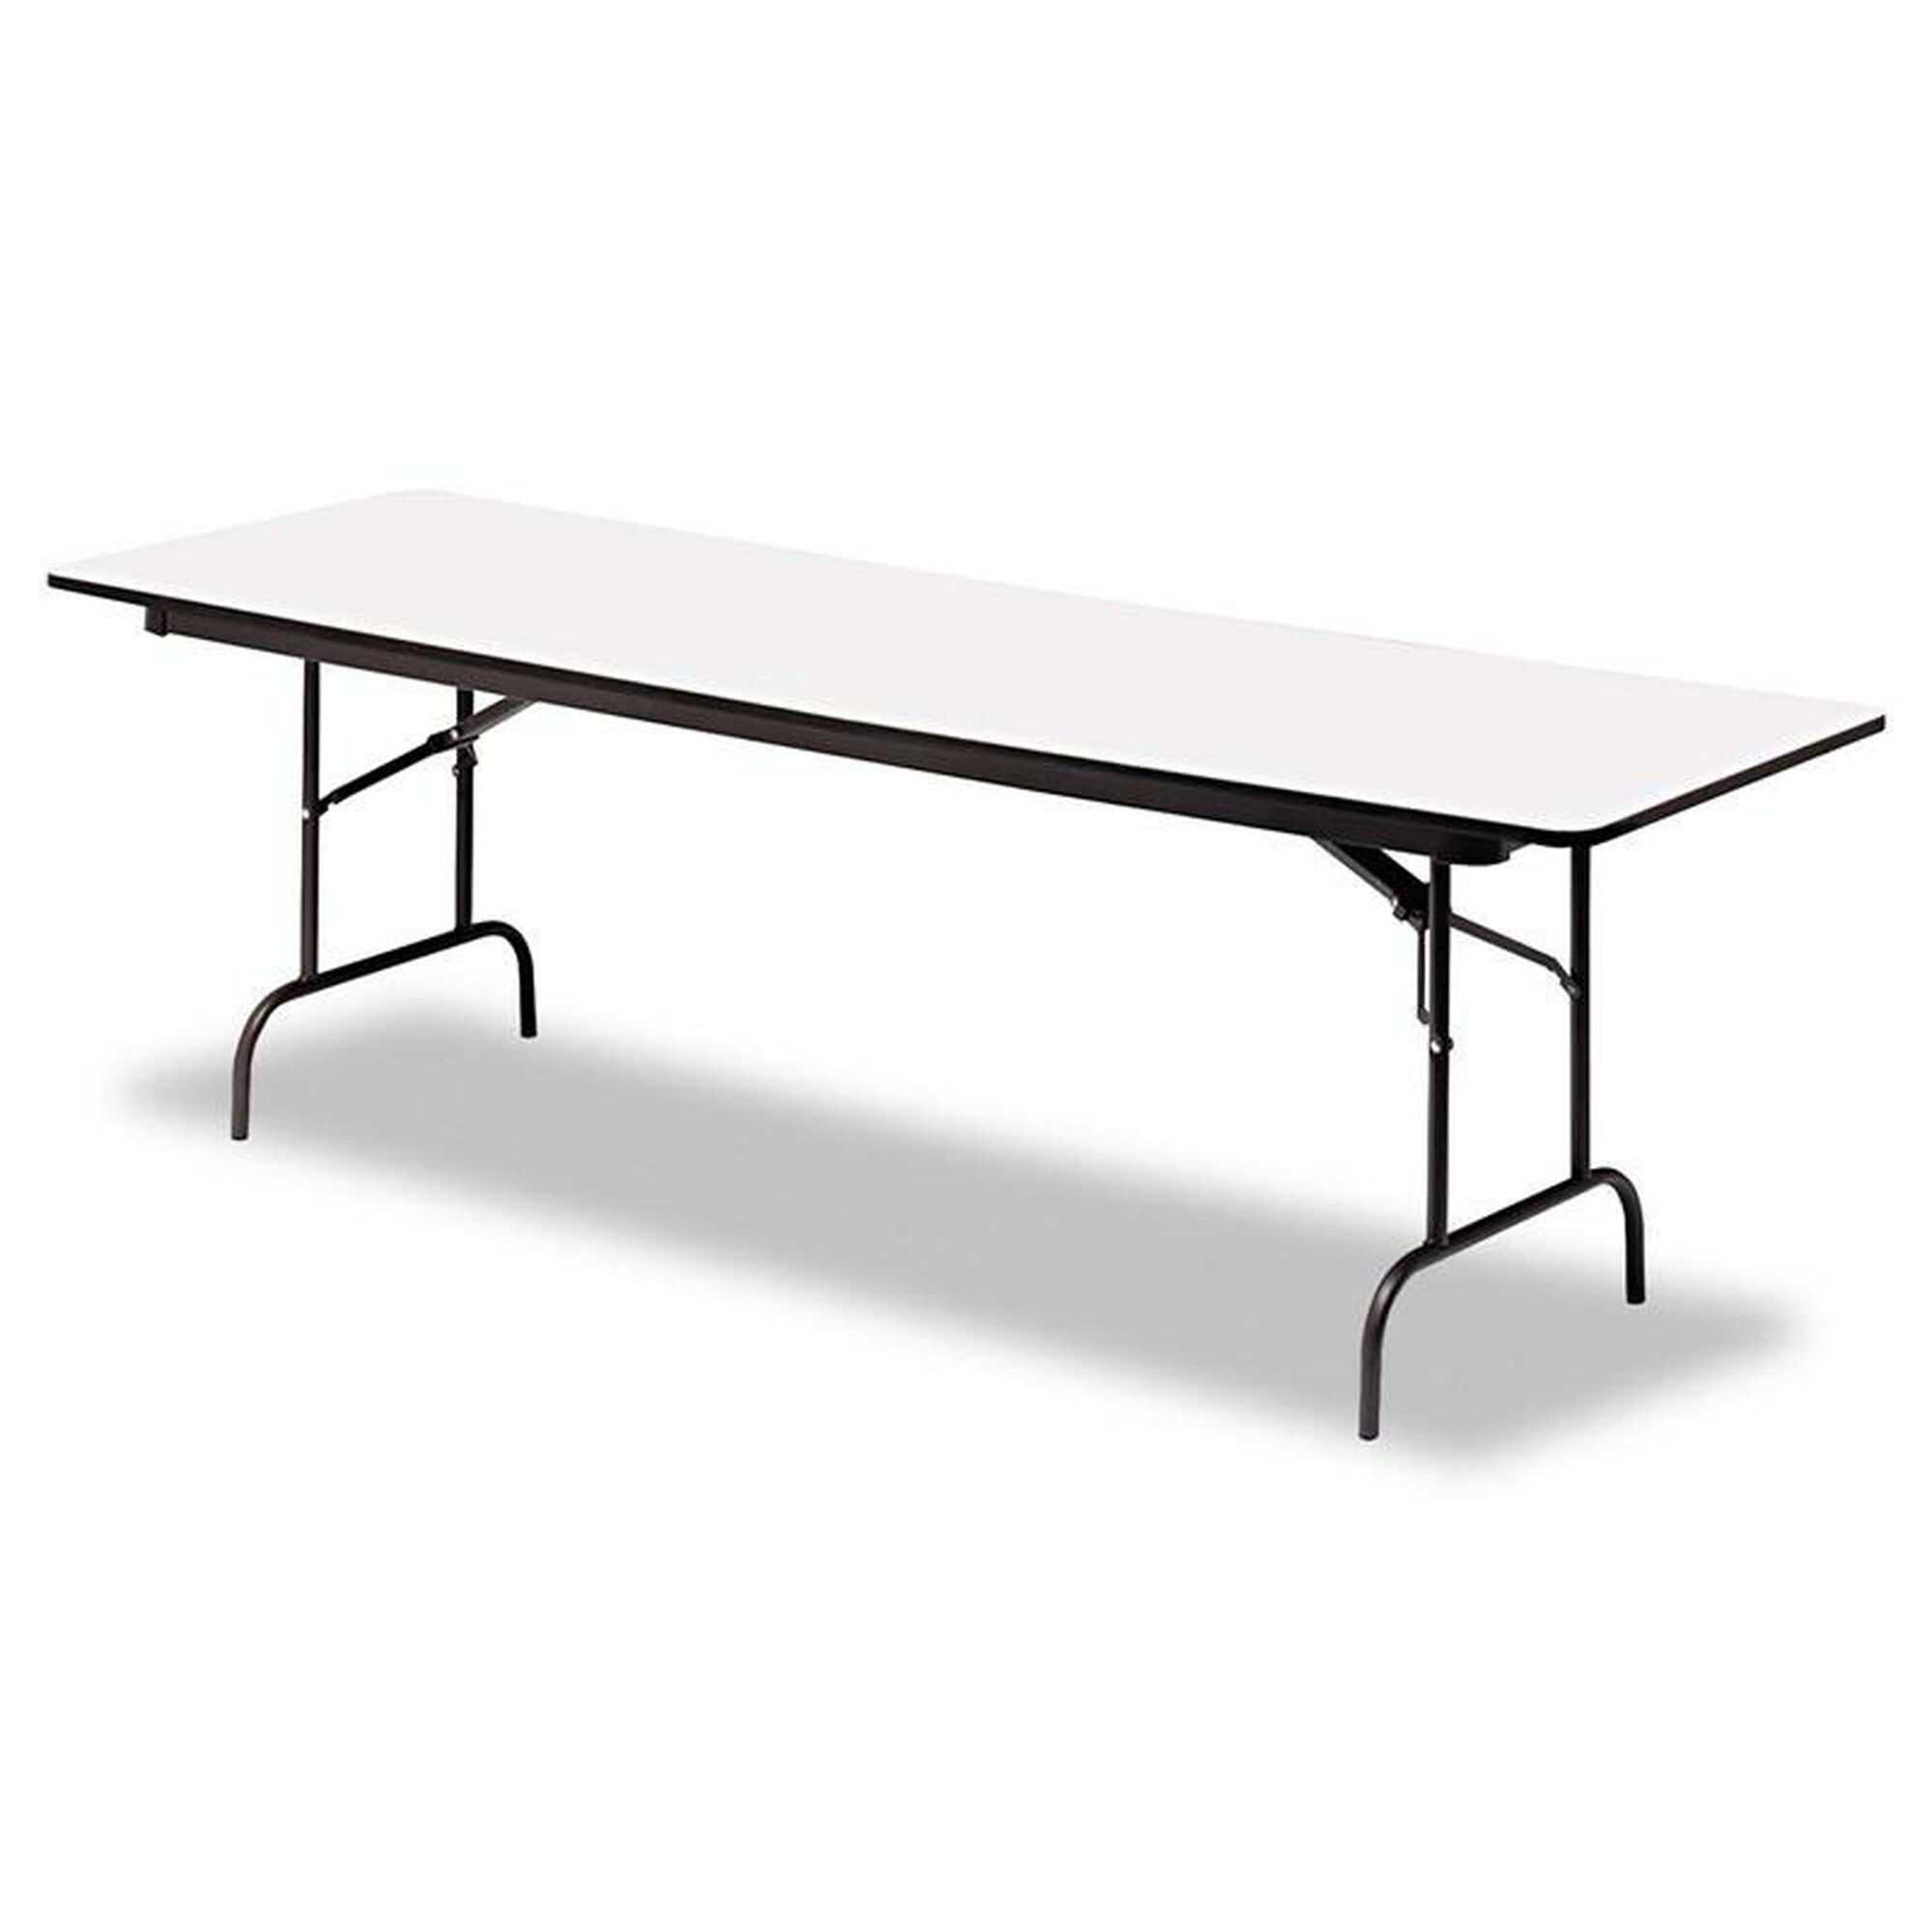 Iceberg ICE55217 Premium Wood Laminate Folding Table with Charcoal Steel Legs, 30" Length x 60" Width x 29" Height, Gray